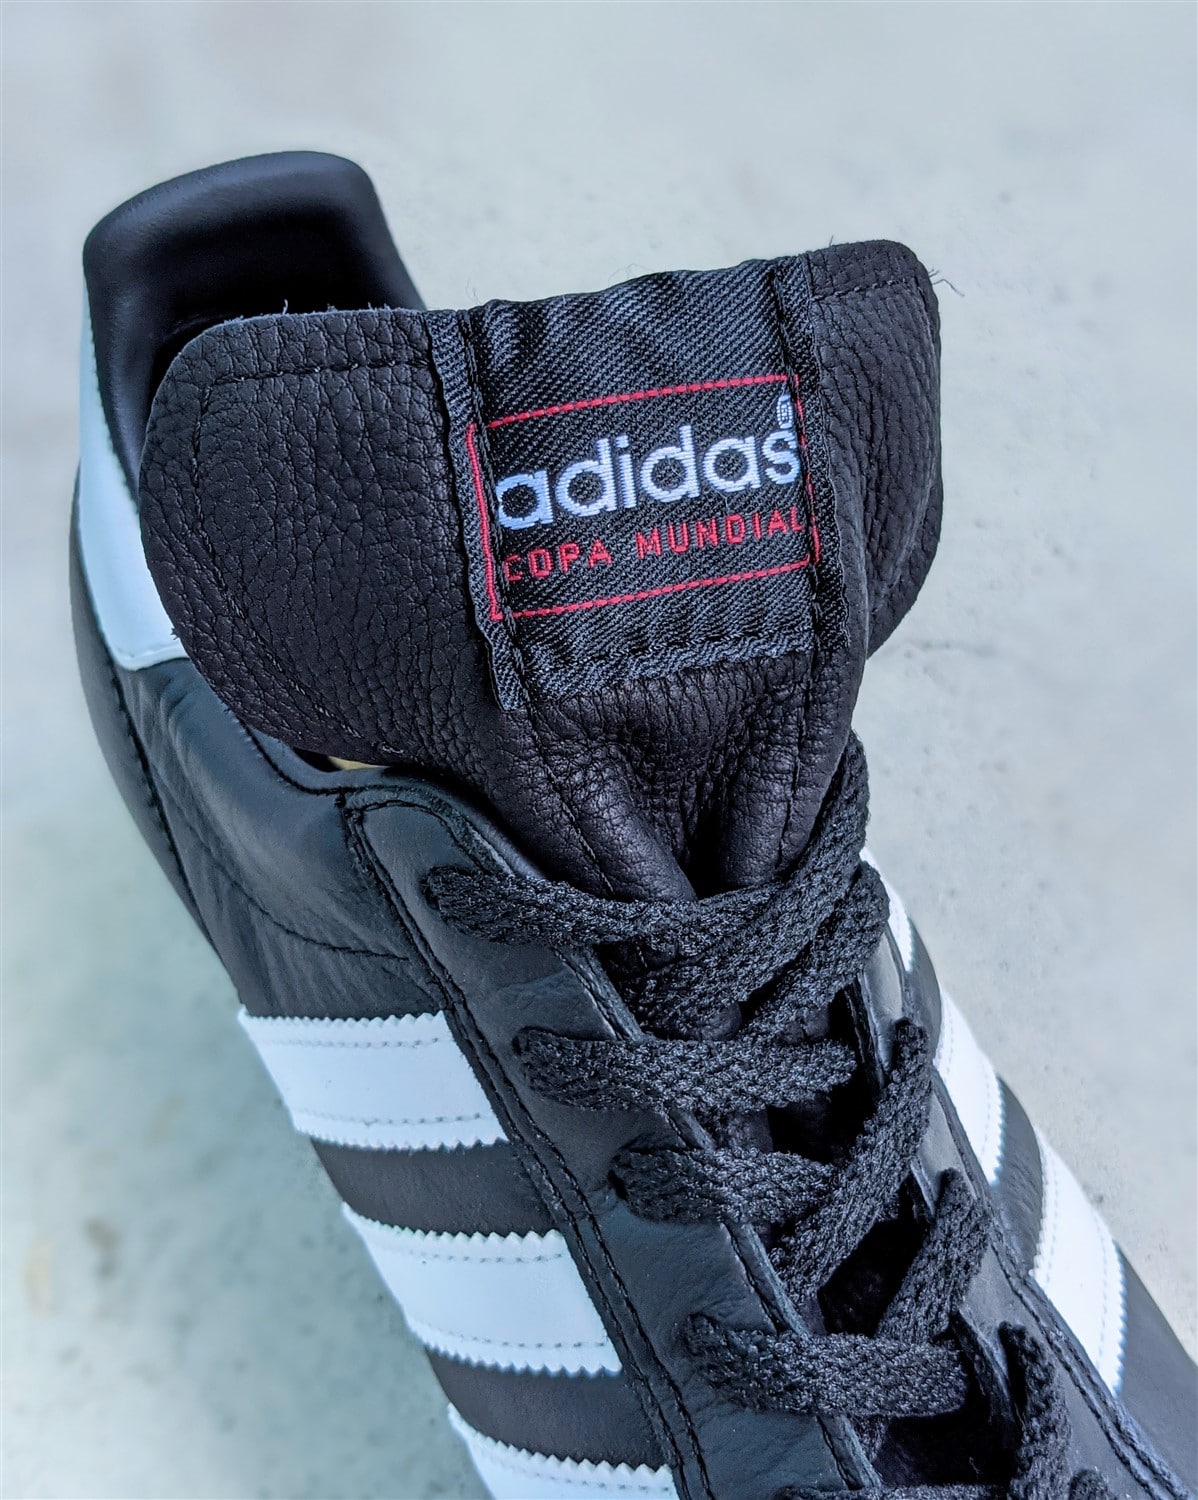 adidas Copa Mundial Review: A no-frills experience in a super large boot